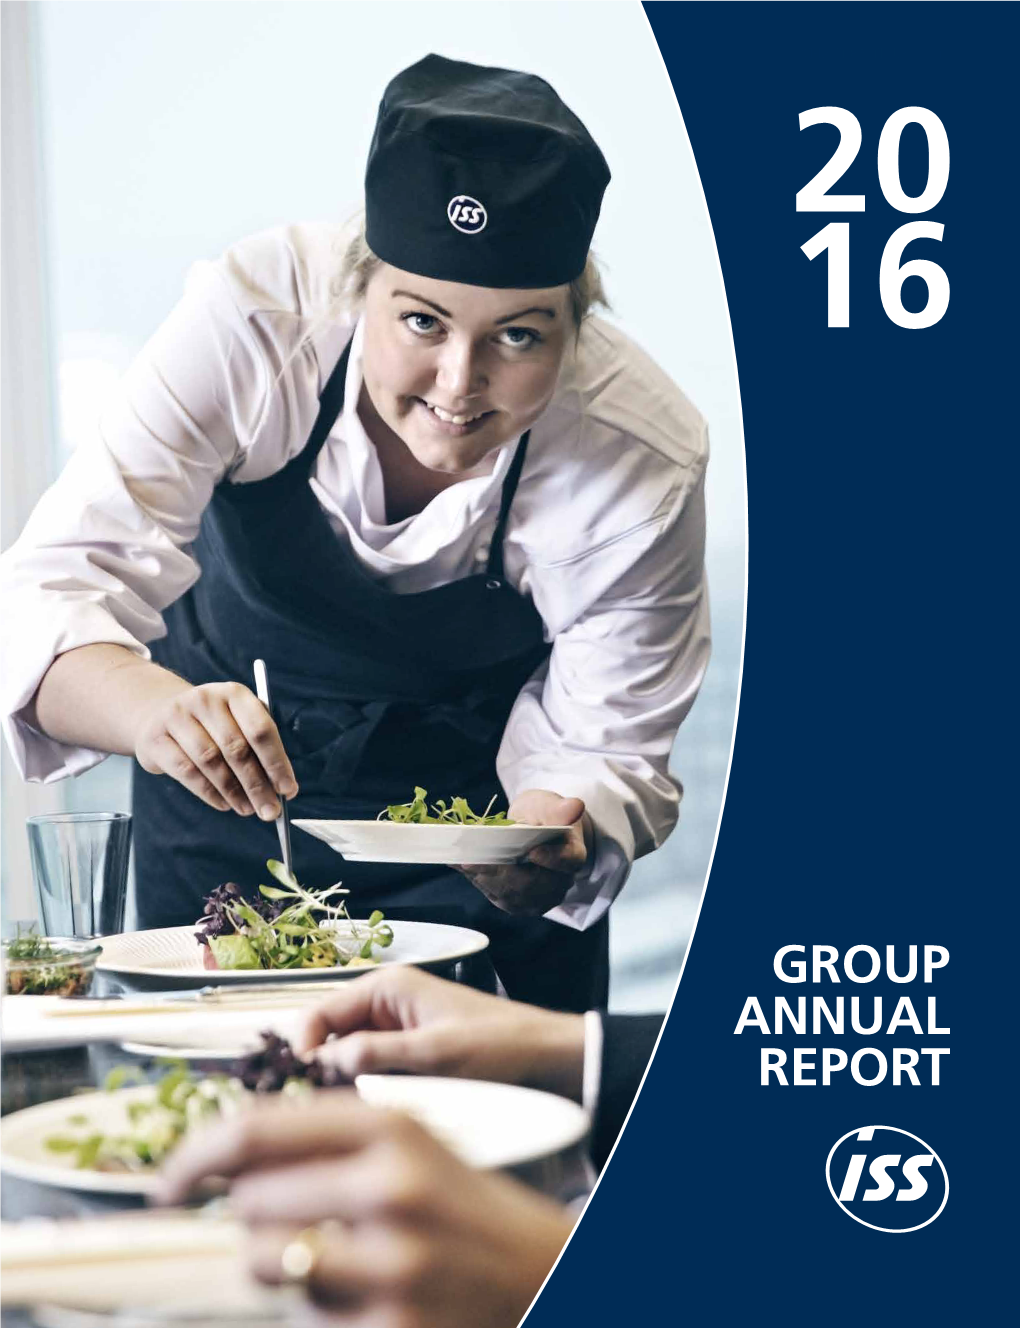 Group Annual Report 2 Chapter Title